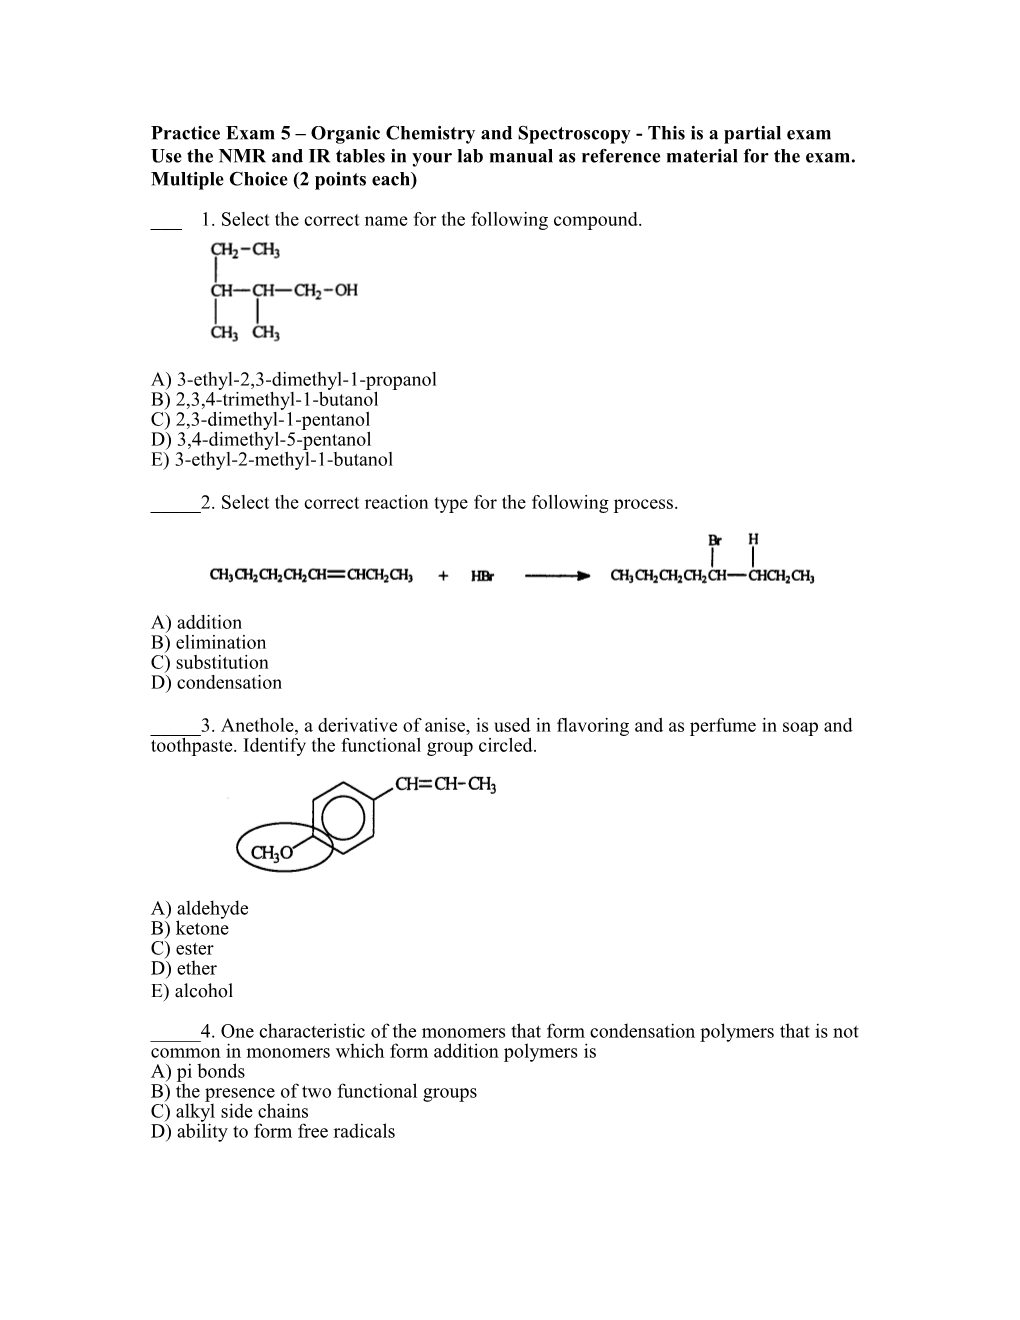 Practice Exam 5 Organic Chemistry and Spectroscopy - This Is a Partial Exam